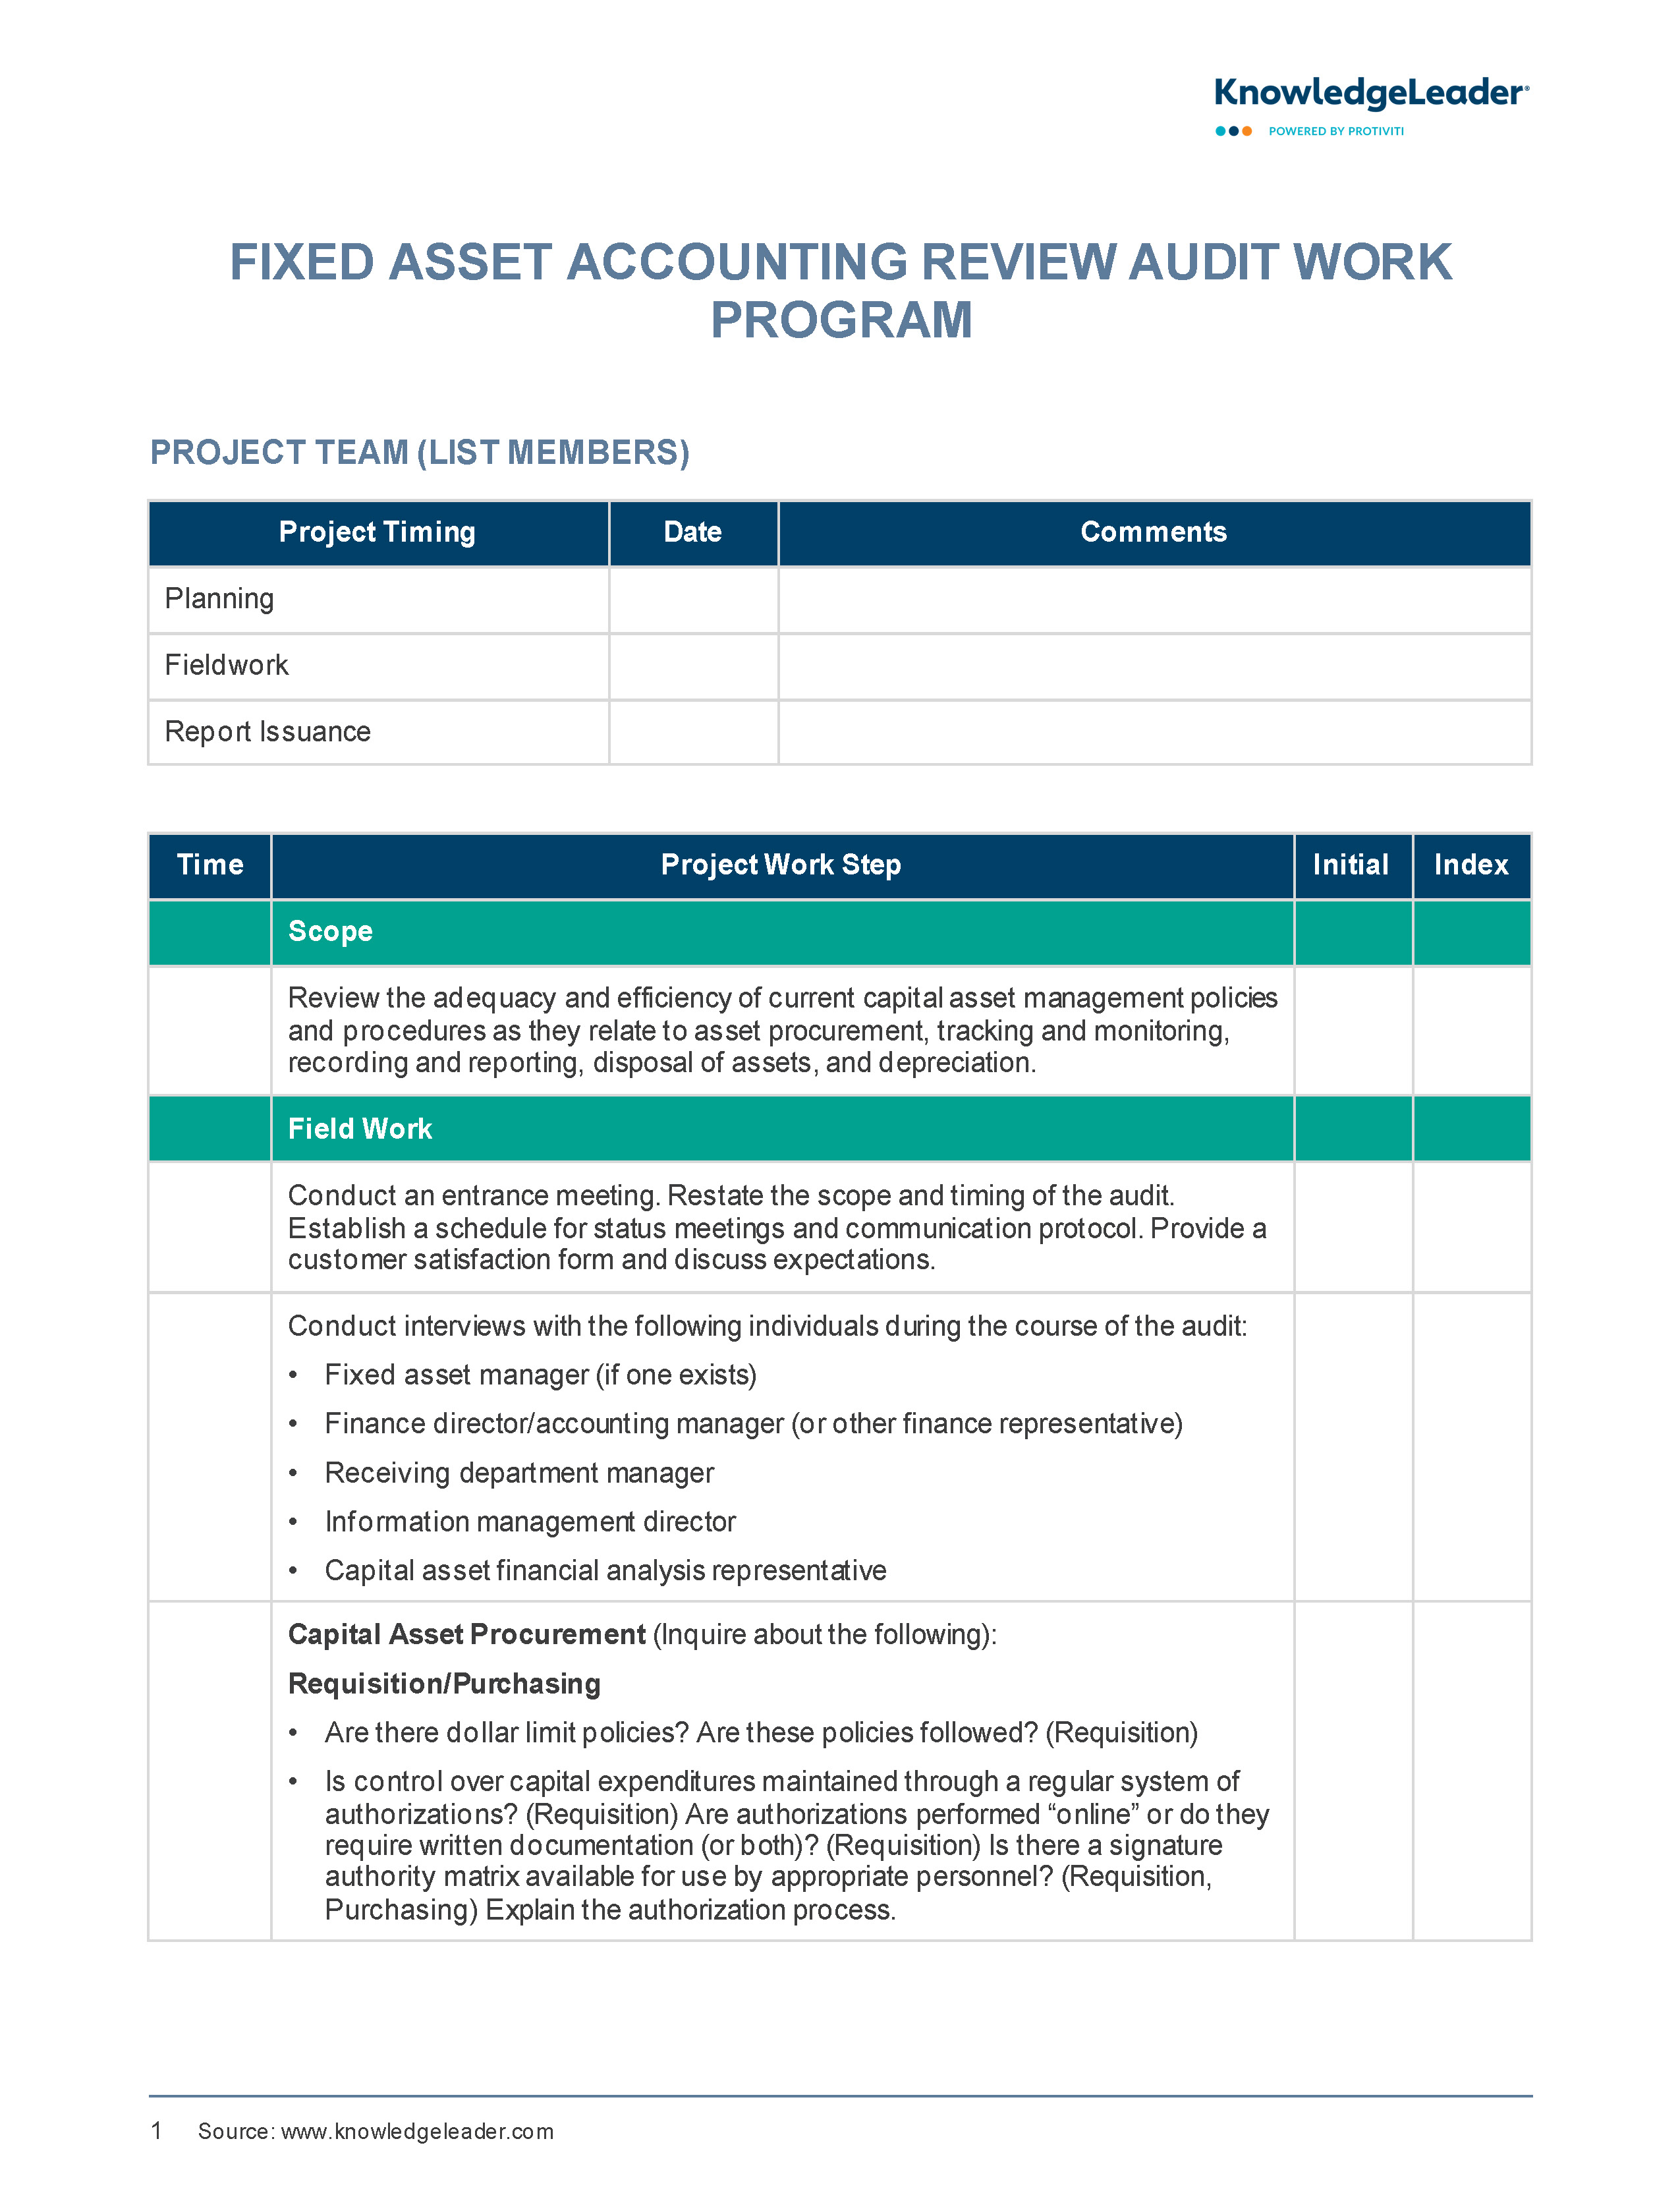 Screenshot of the first page of Fixed Asset Accounting Review Audit Work Program